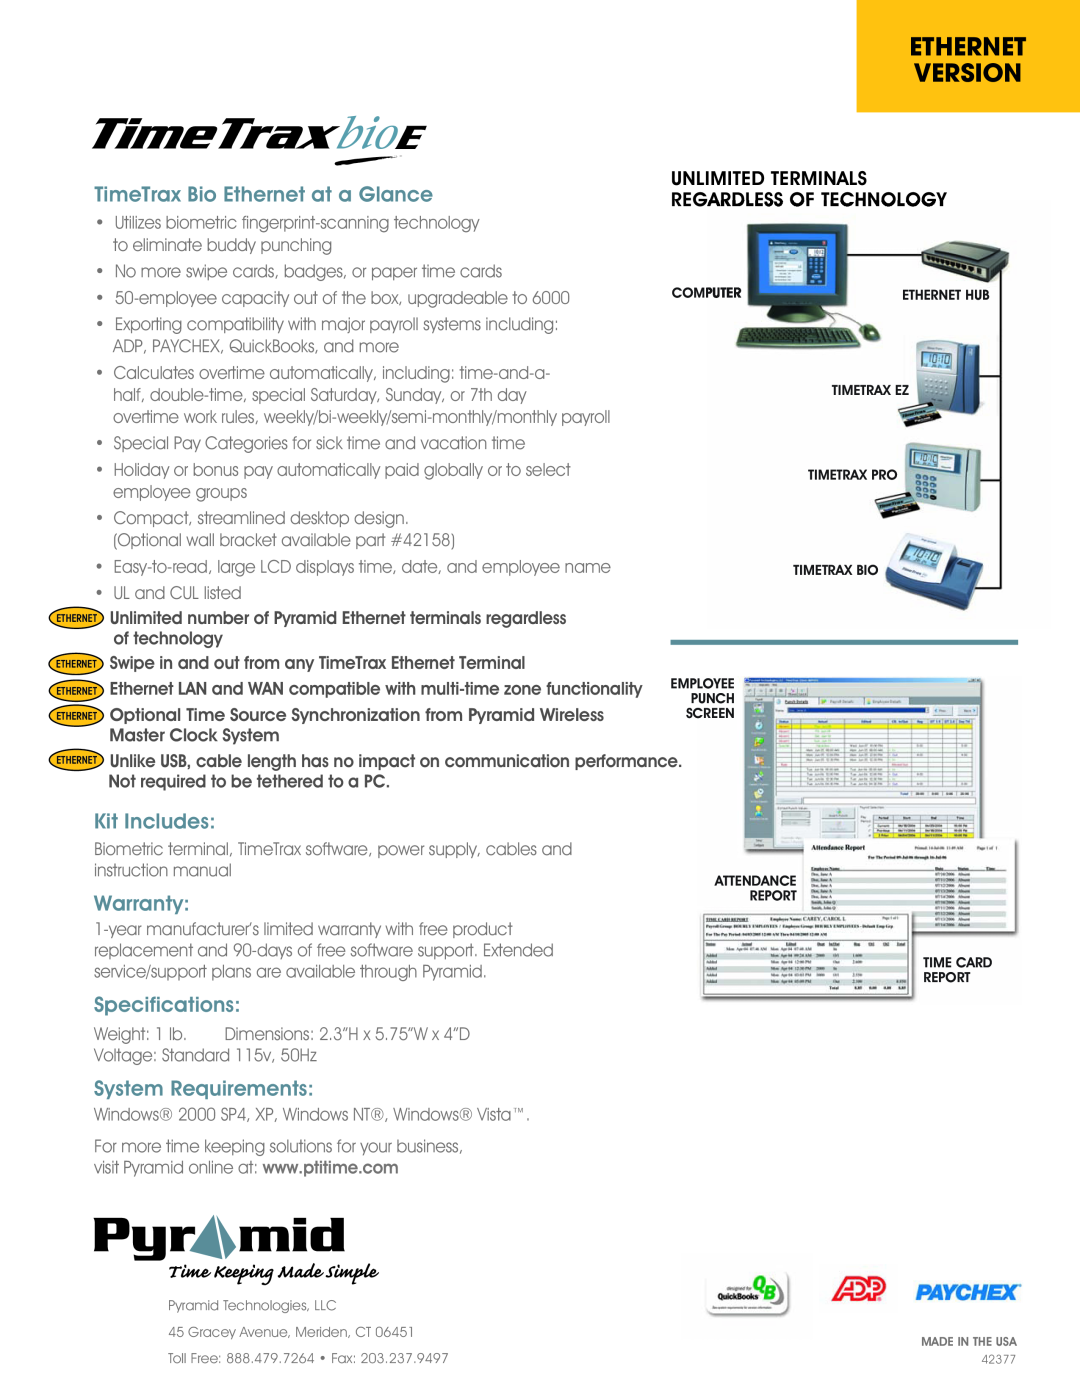 Pyramid Technologies manual Version, TimeTrax Bio Ethernet at a Glance, Kit Includes, Warranty, Specifications 